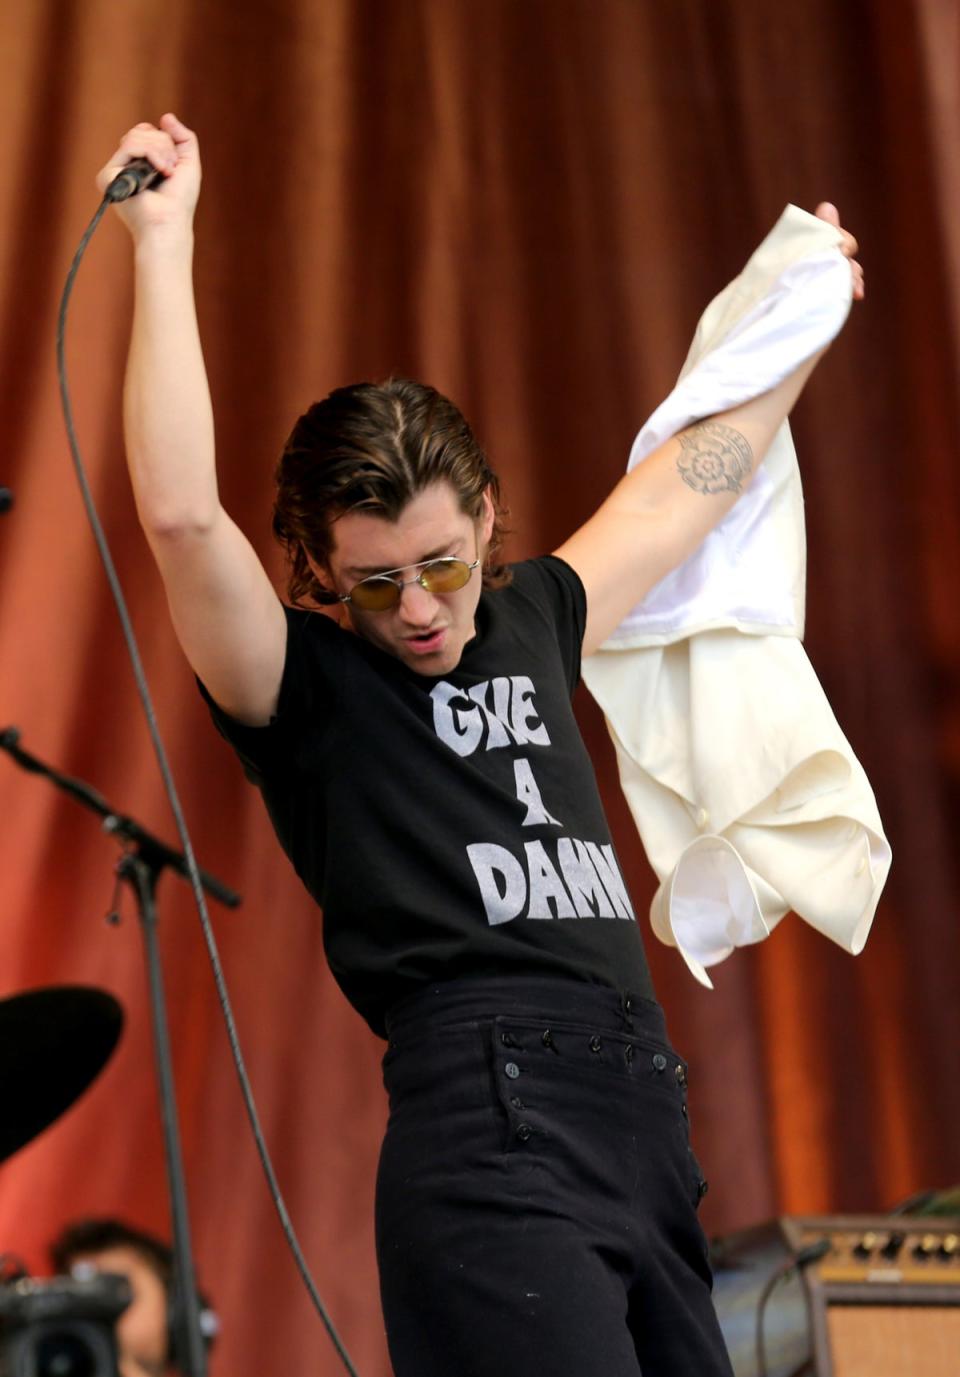 Reluctant star: the Arctic Monkeys frontman (Getty Images)